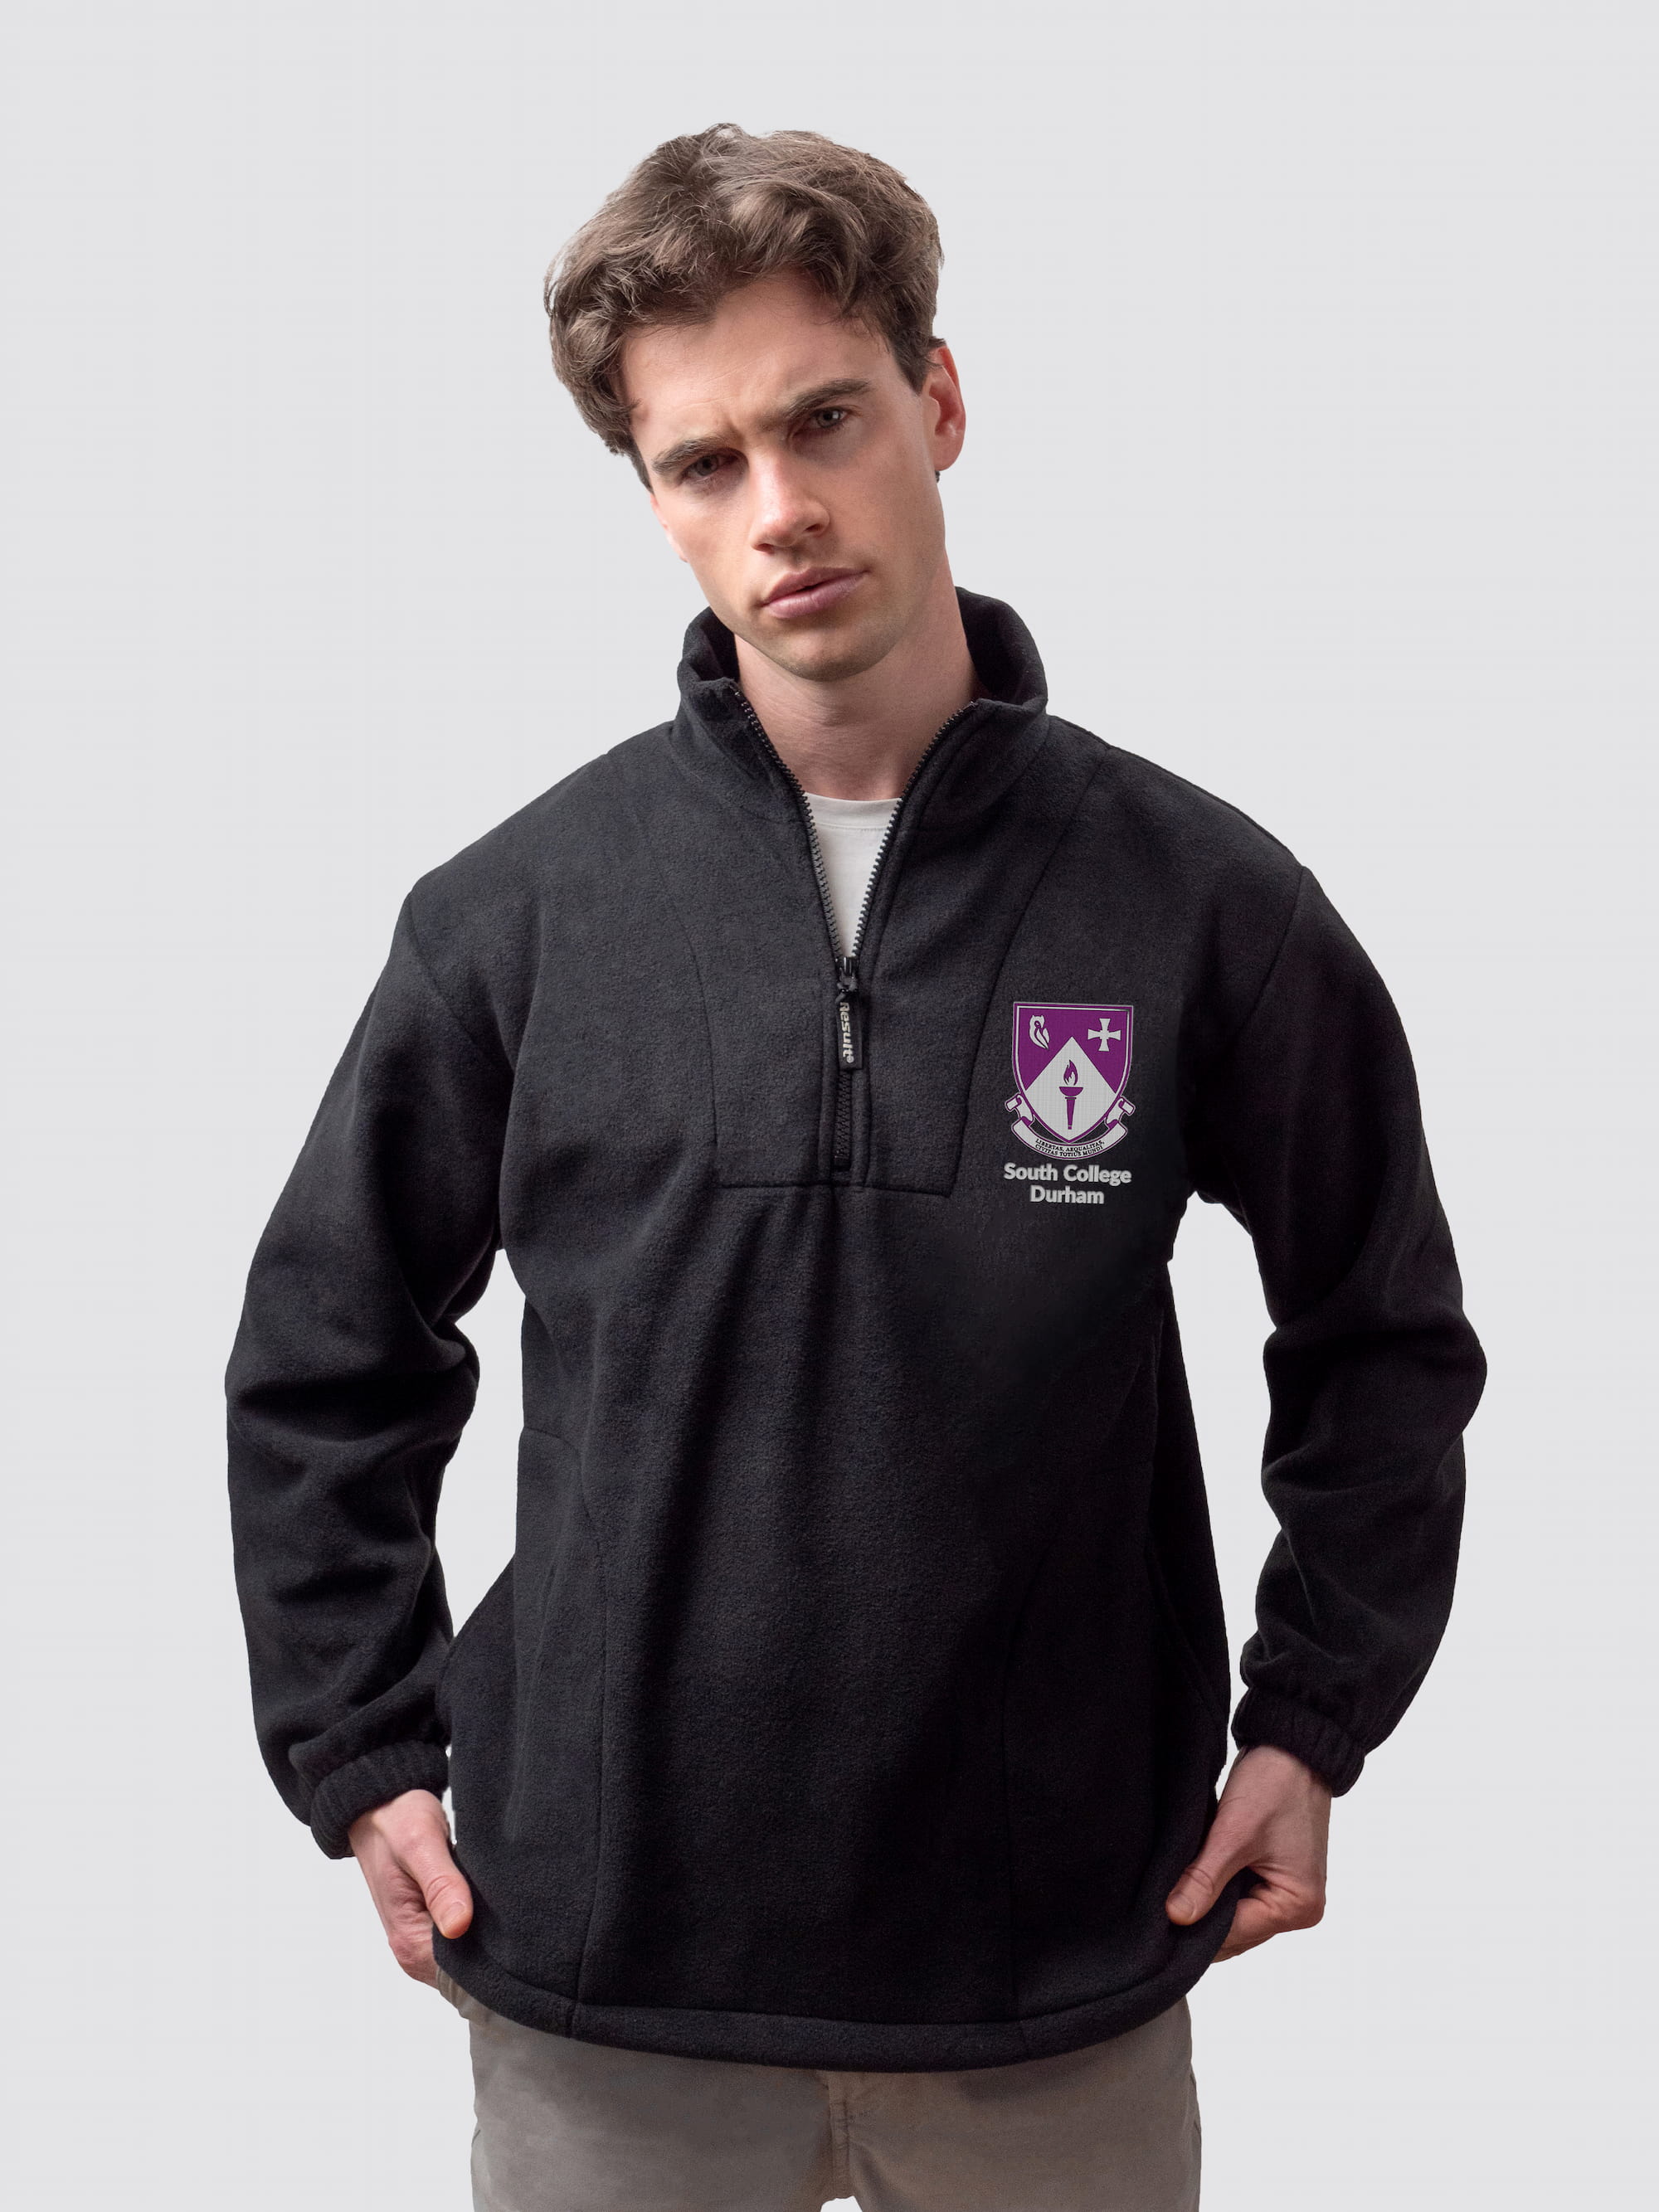 Durham university fleece, with custom embroidered initials and South crest